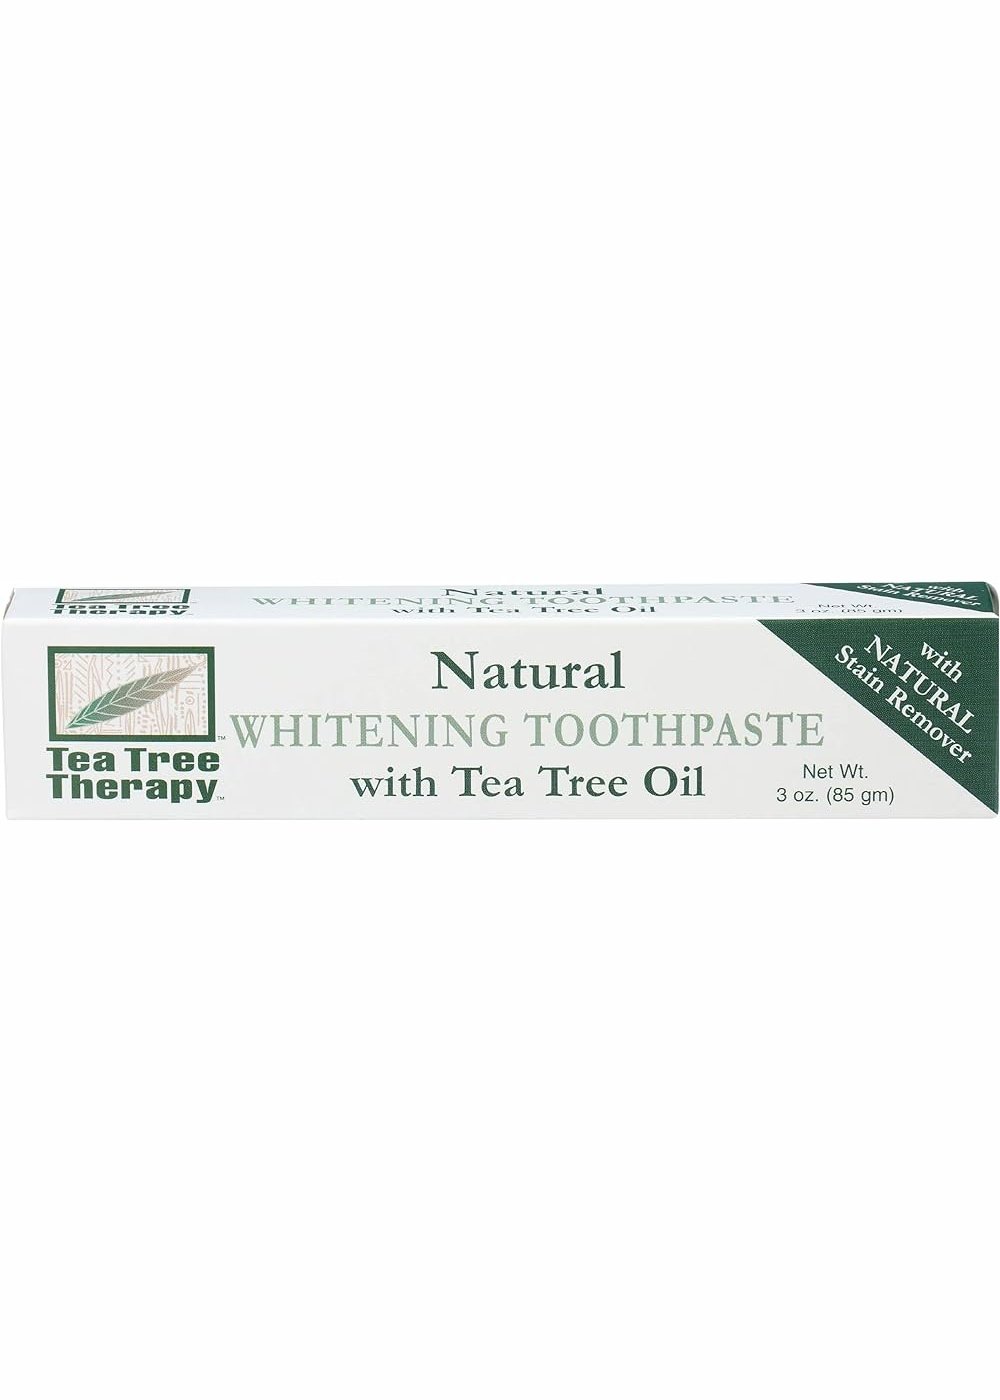 TEA TREE THERAPY Natural Whitening Toothpaste